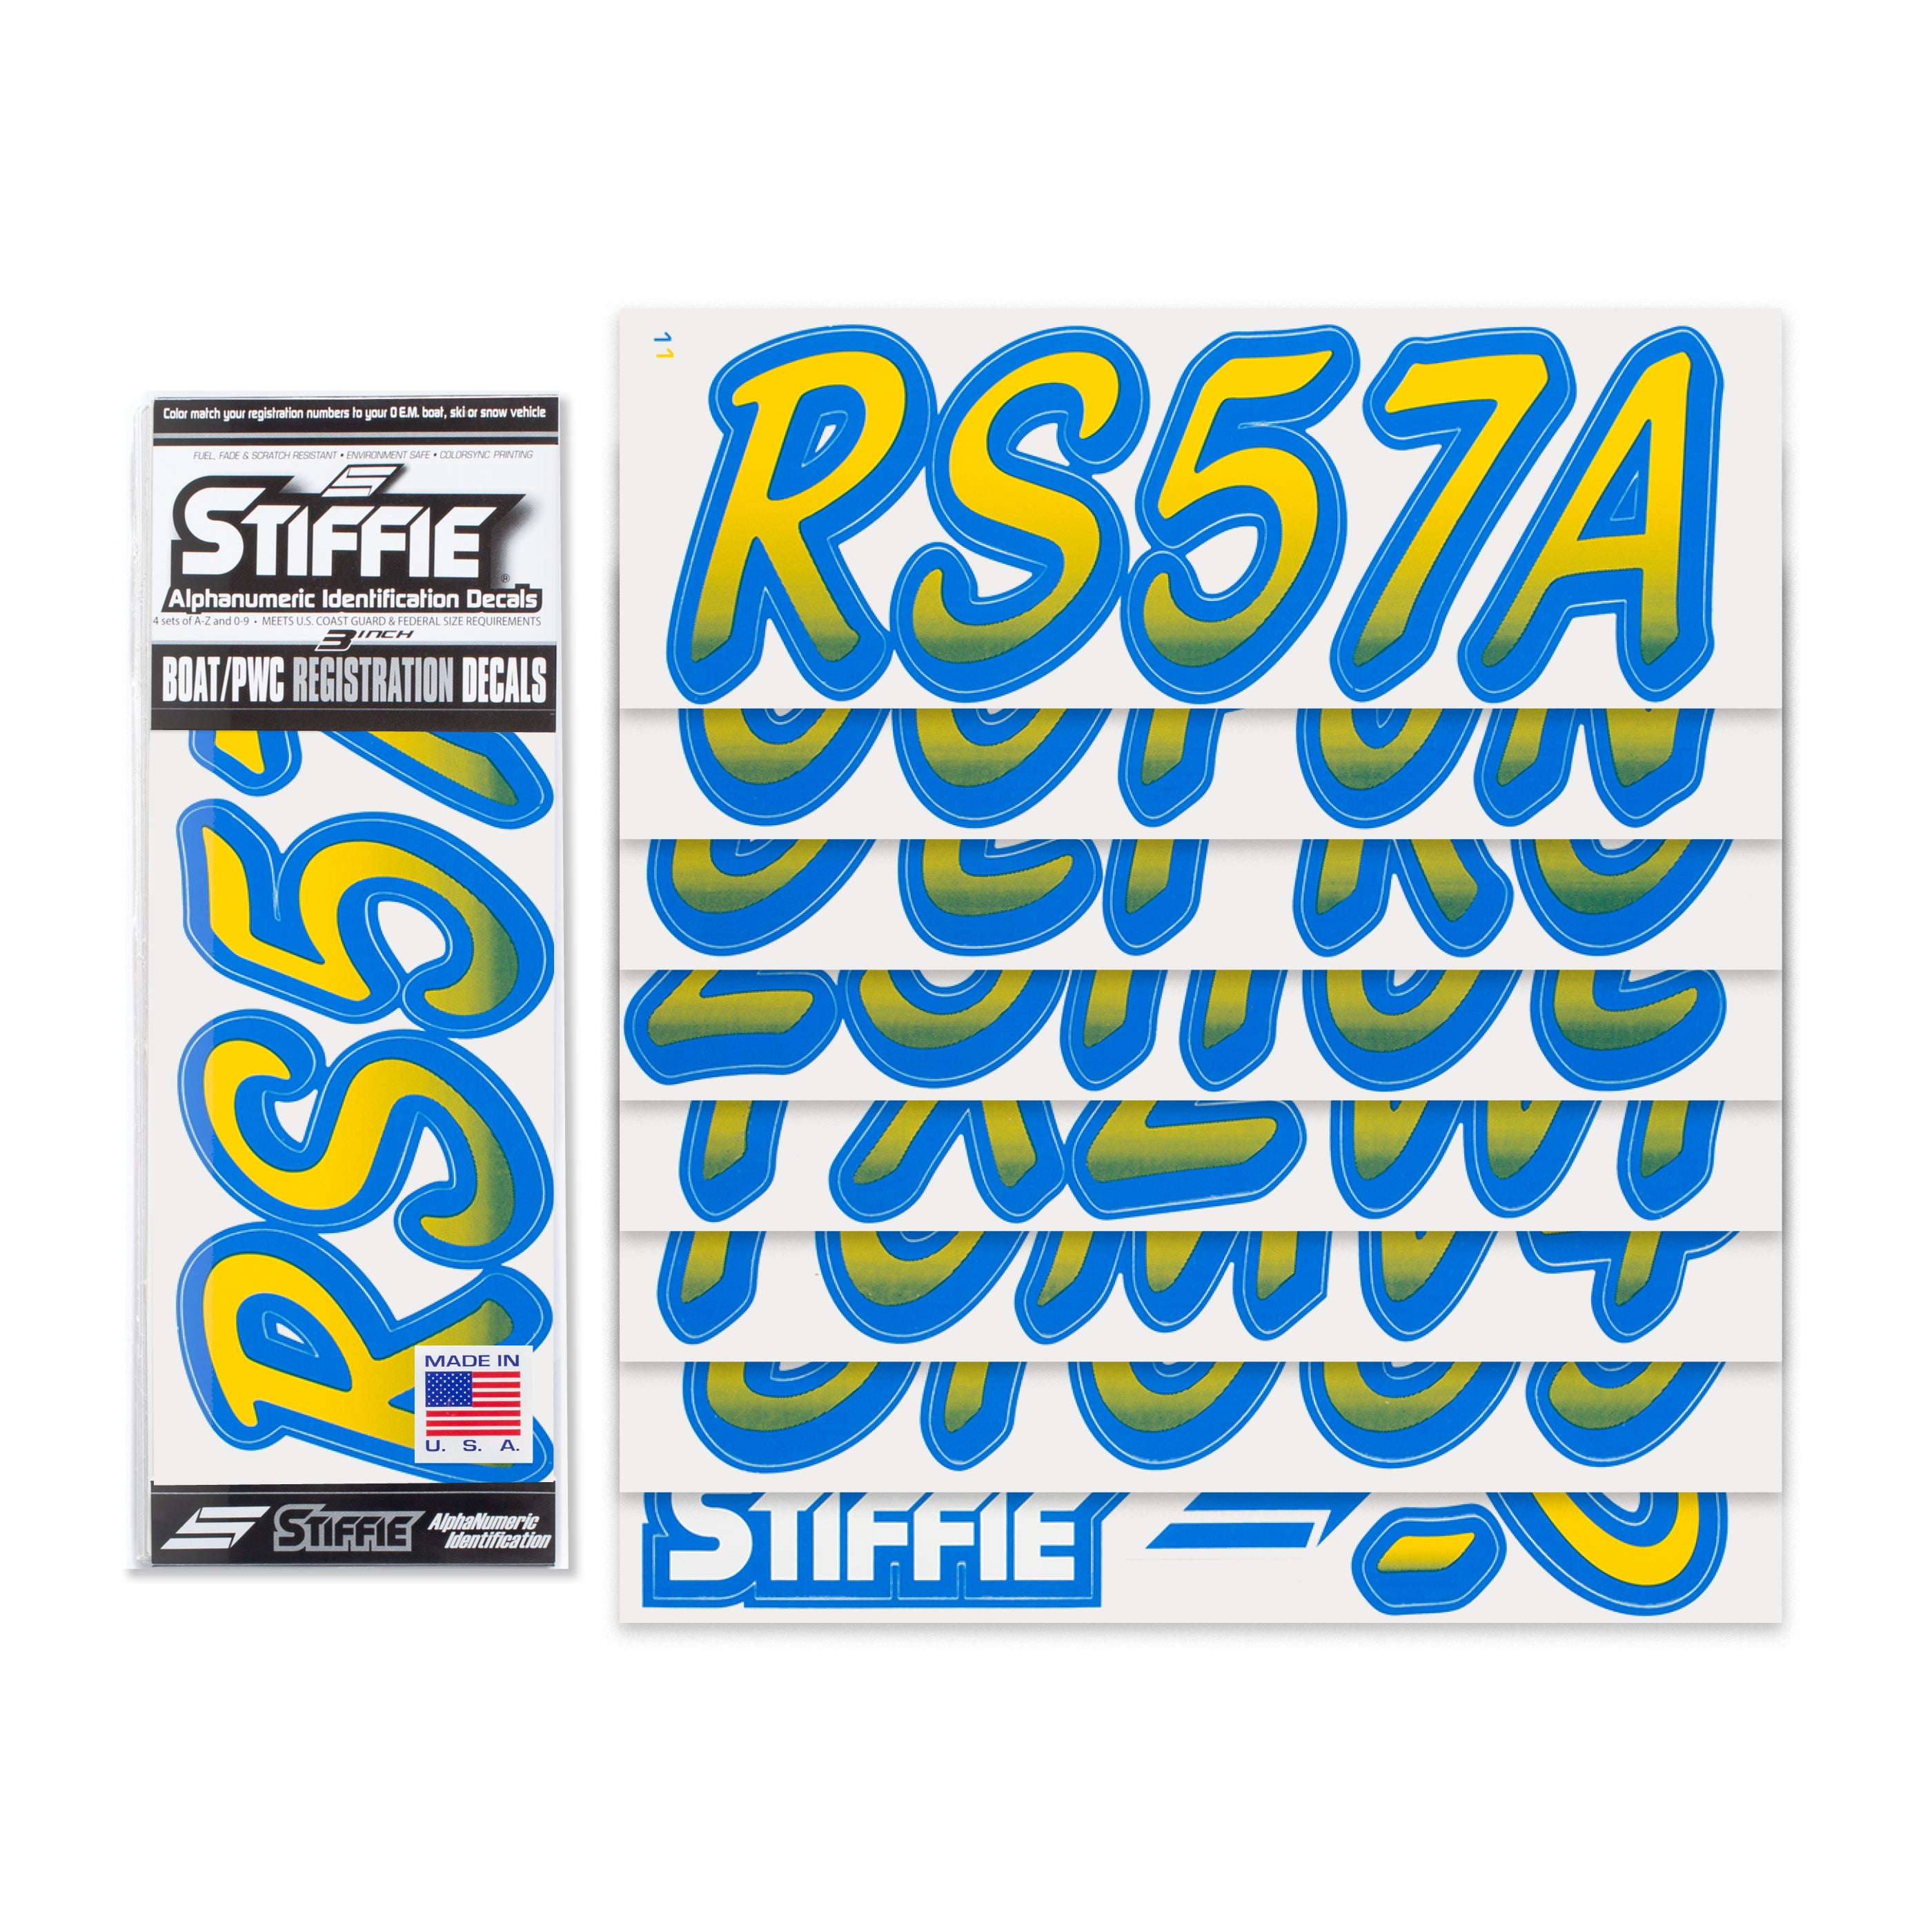 STIFFIE Whipline Yellow/Blue 3" Alpha-Numeric Registration Identification Numbers Stickers Decals for Boats & Personal Watercraft